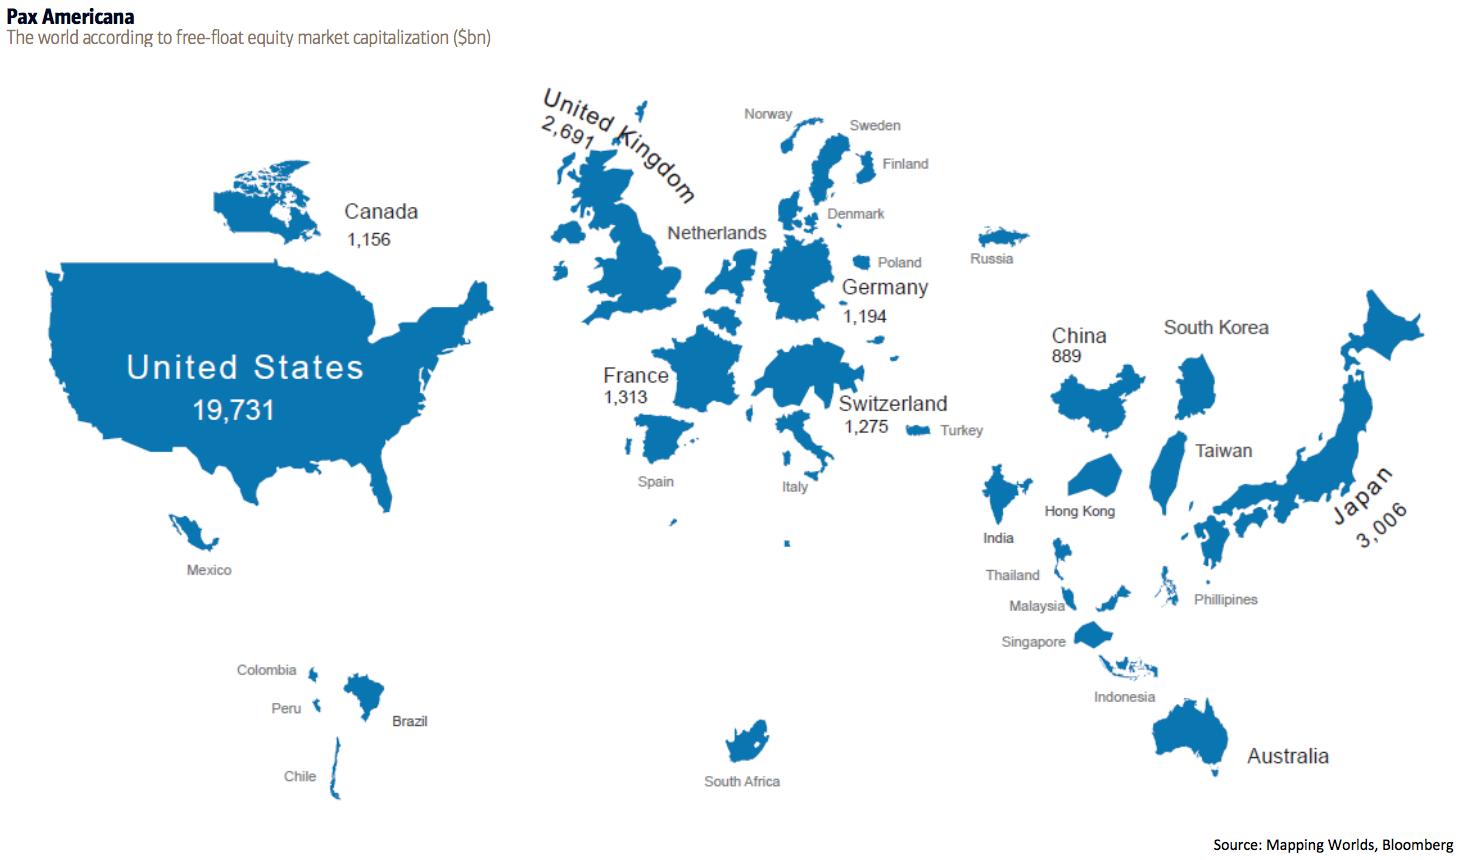 This brilliant world map shows countries scaled to the size of their stock markets